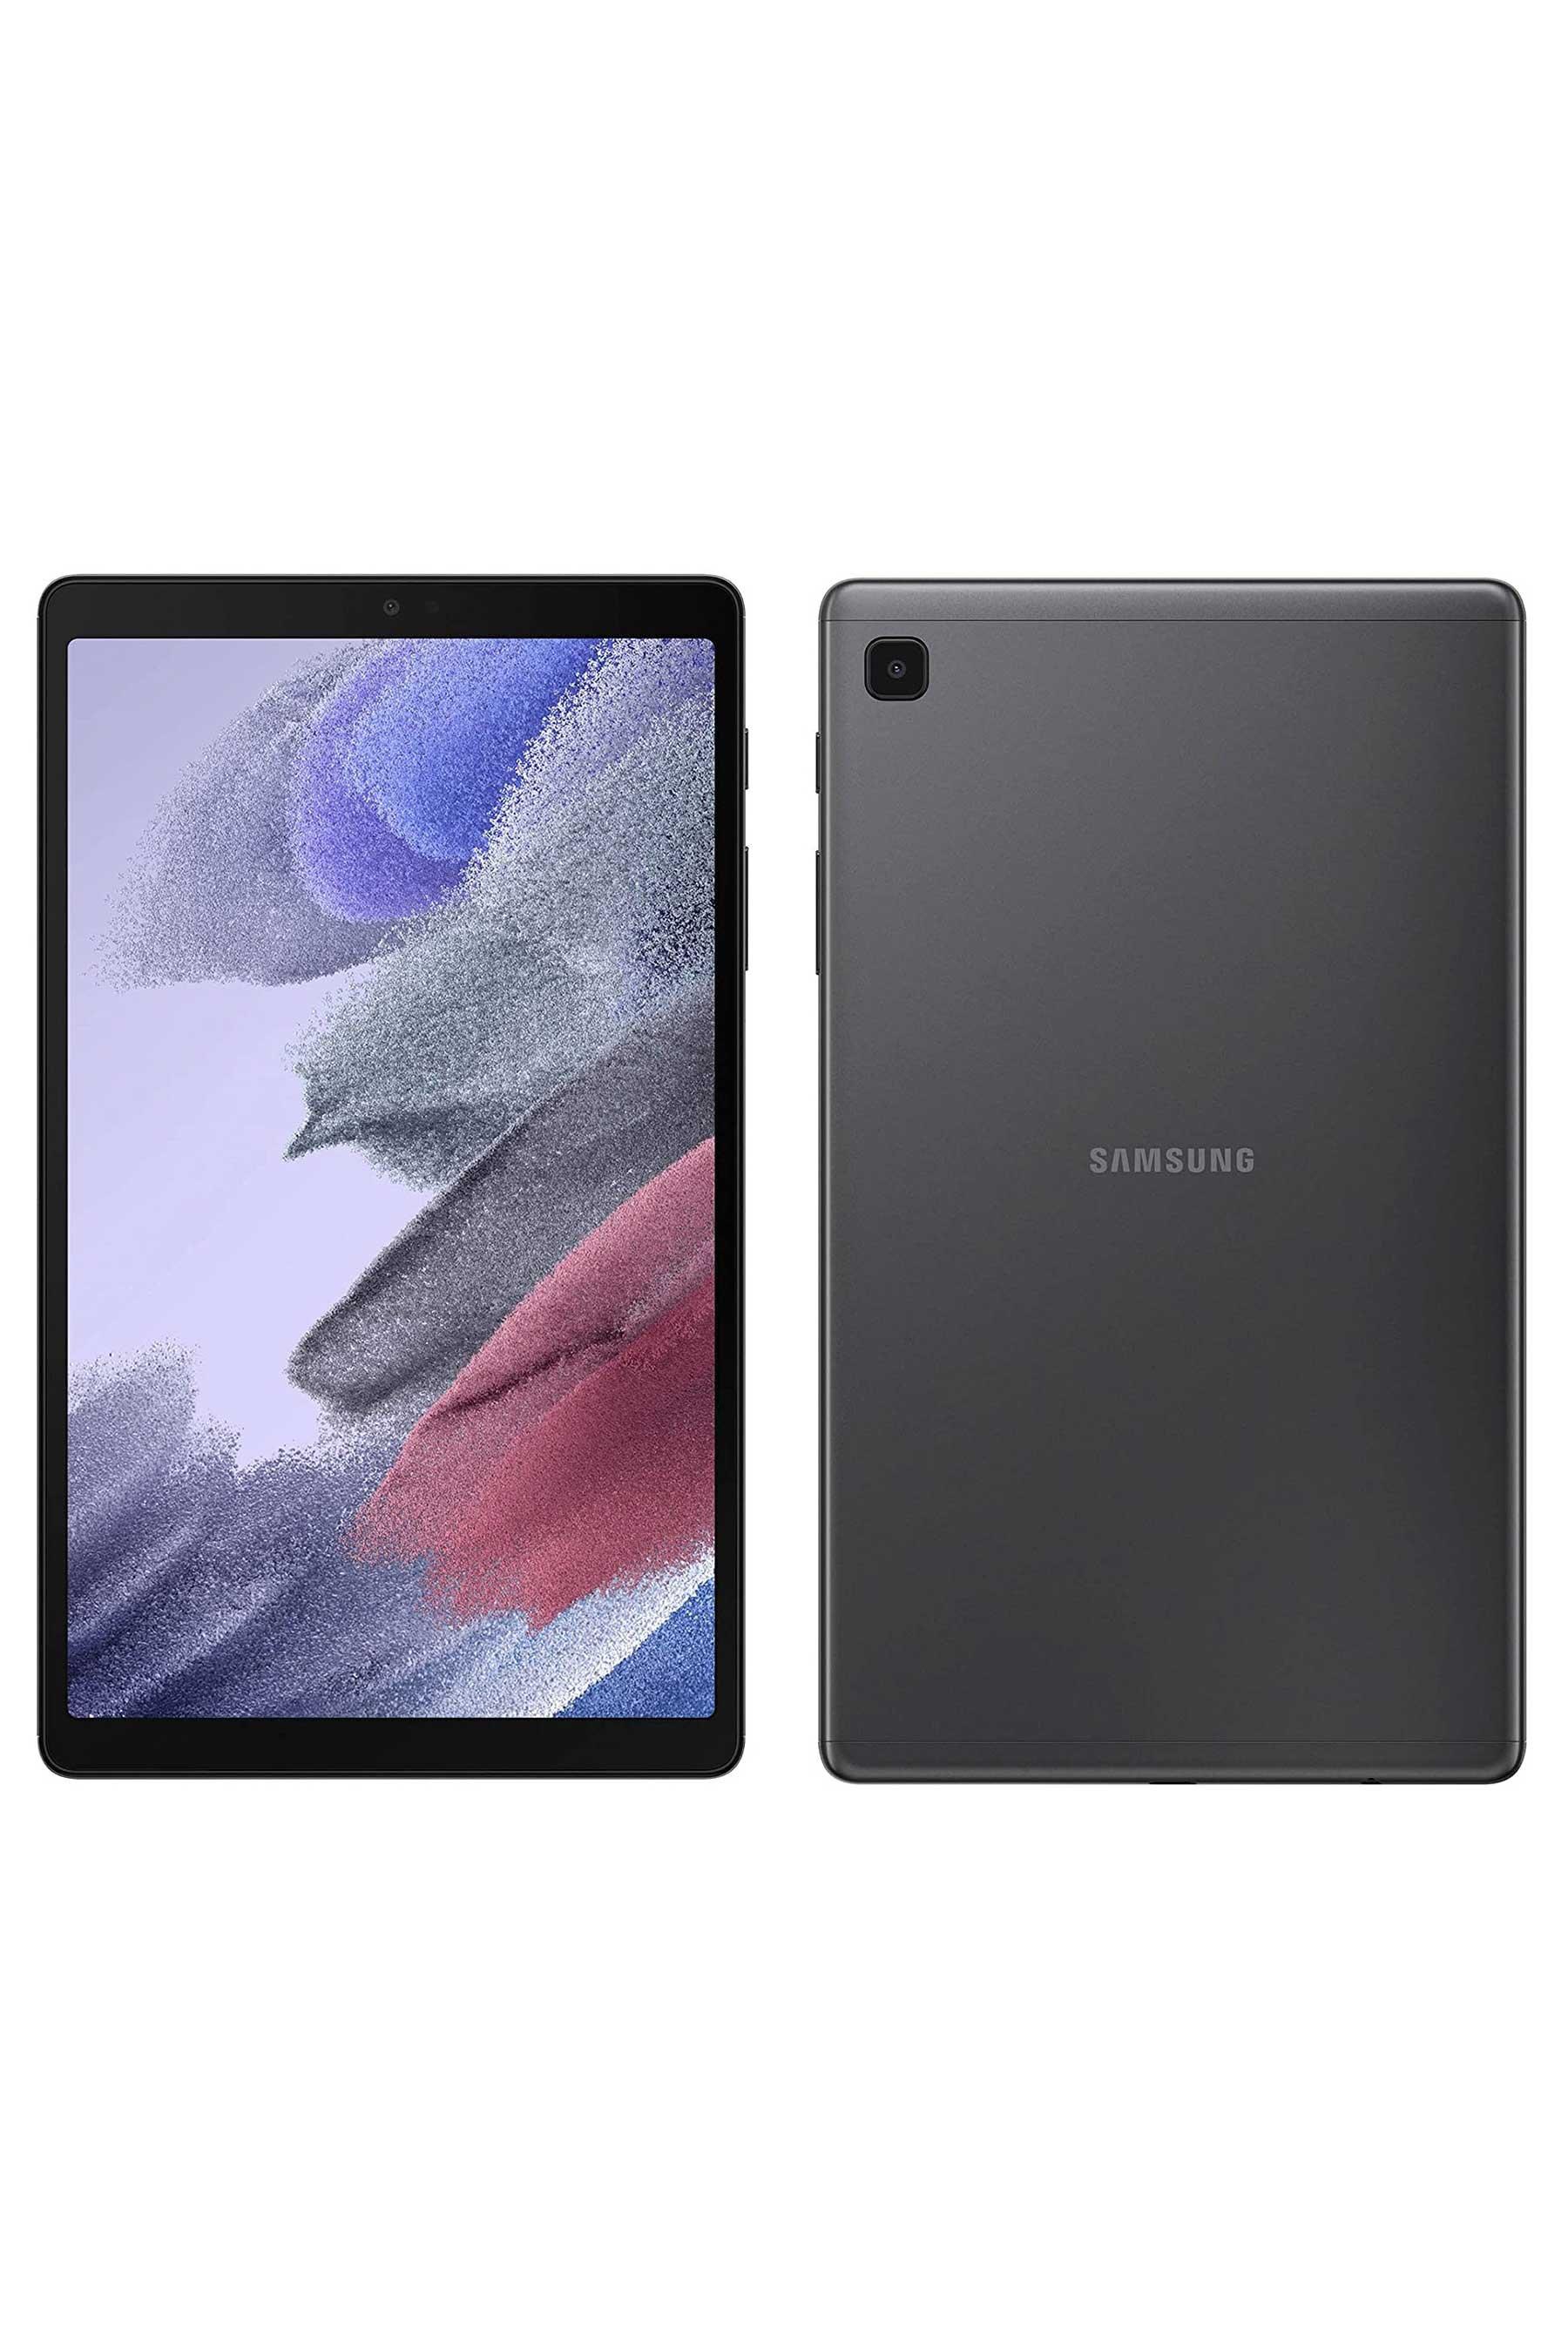 Samsung Galaxy Tab A7 Lite 8.7 inch WiFi - Incredible Connection